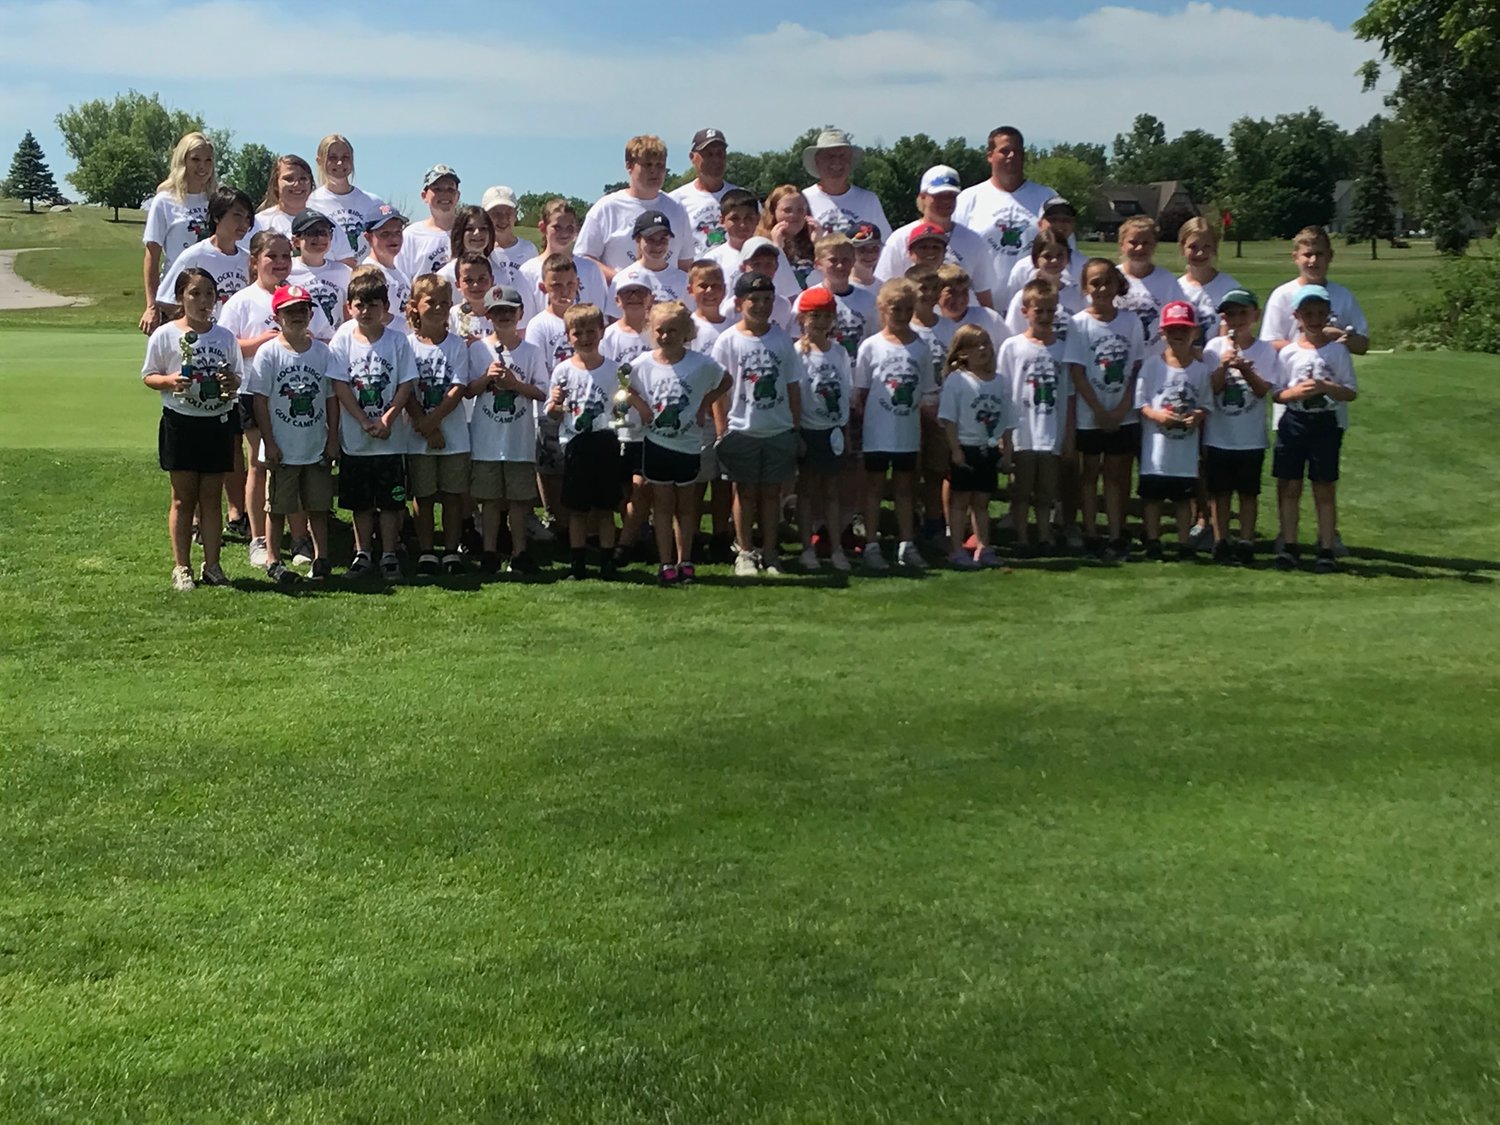 A group photo is taken of all the campers at the annual Rocky Ridge Golf Camp.